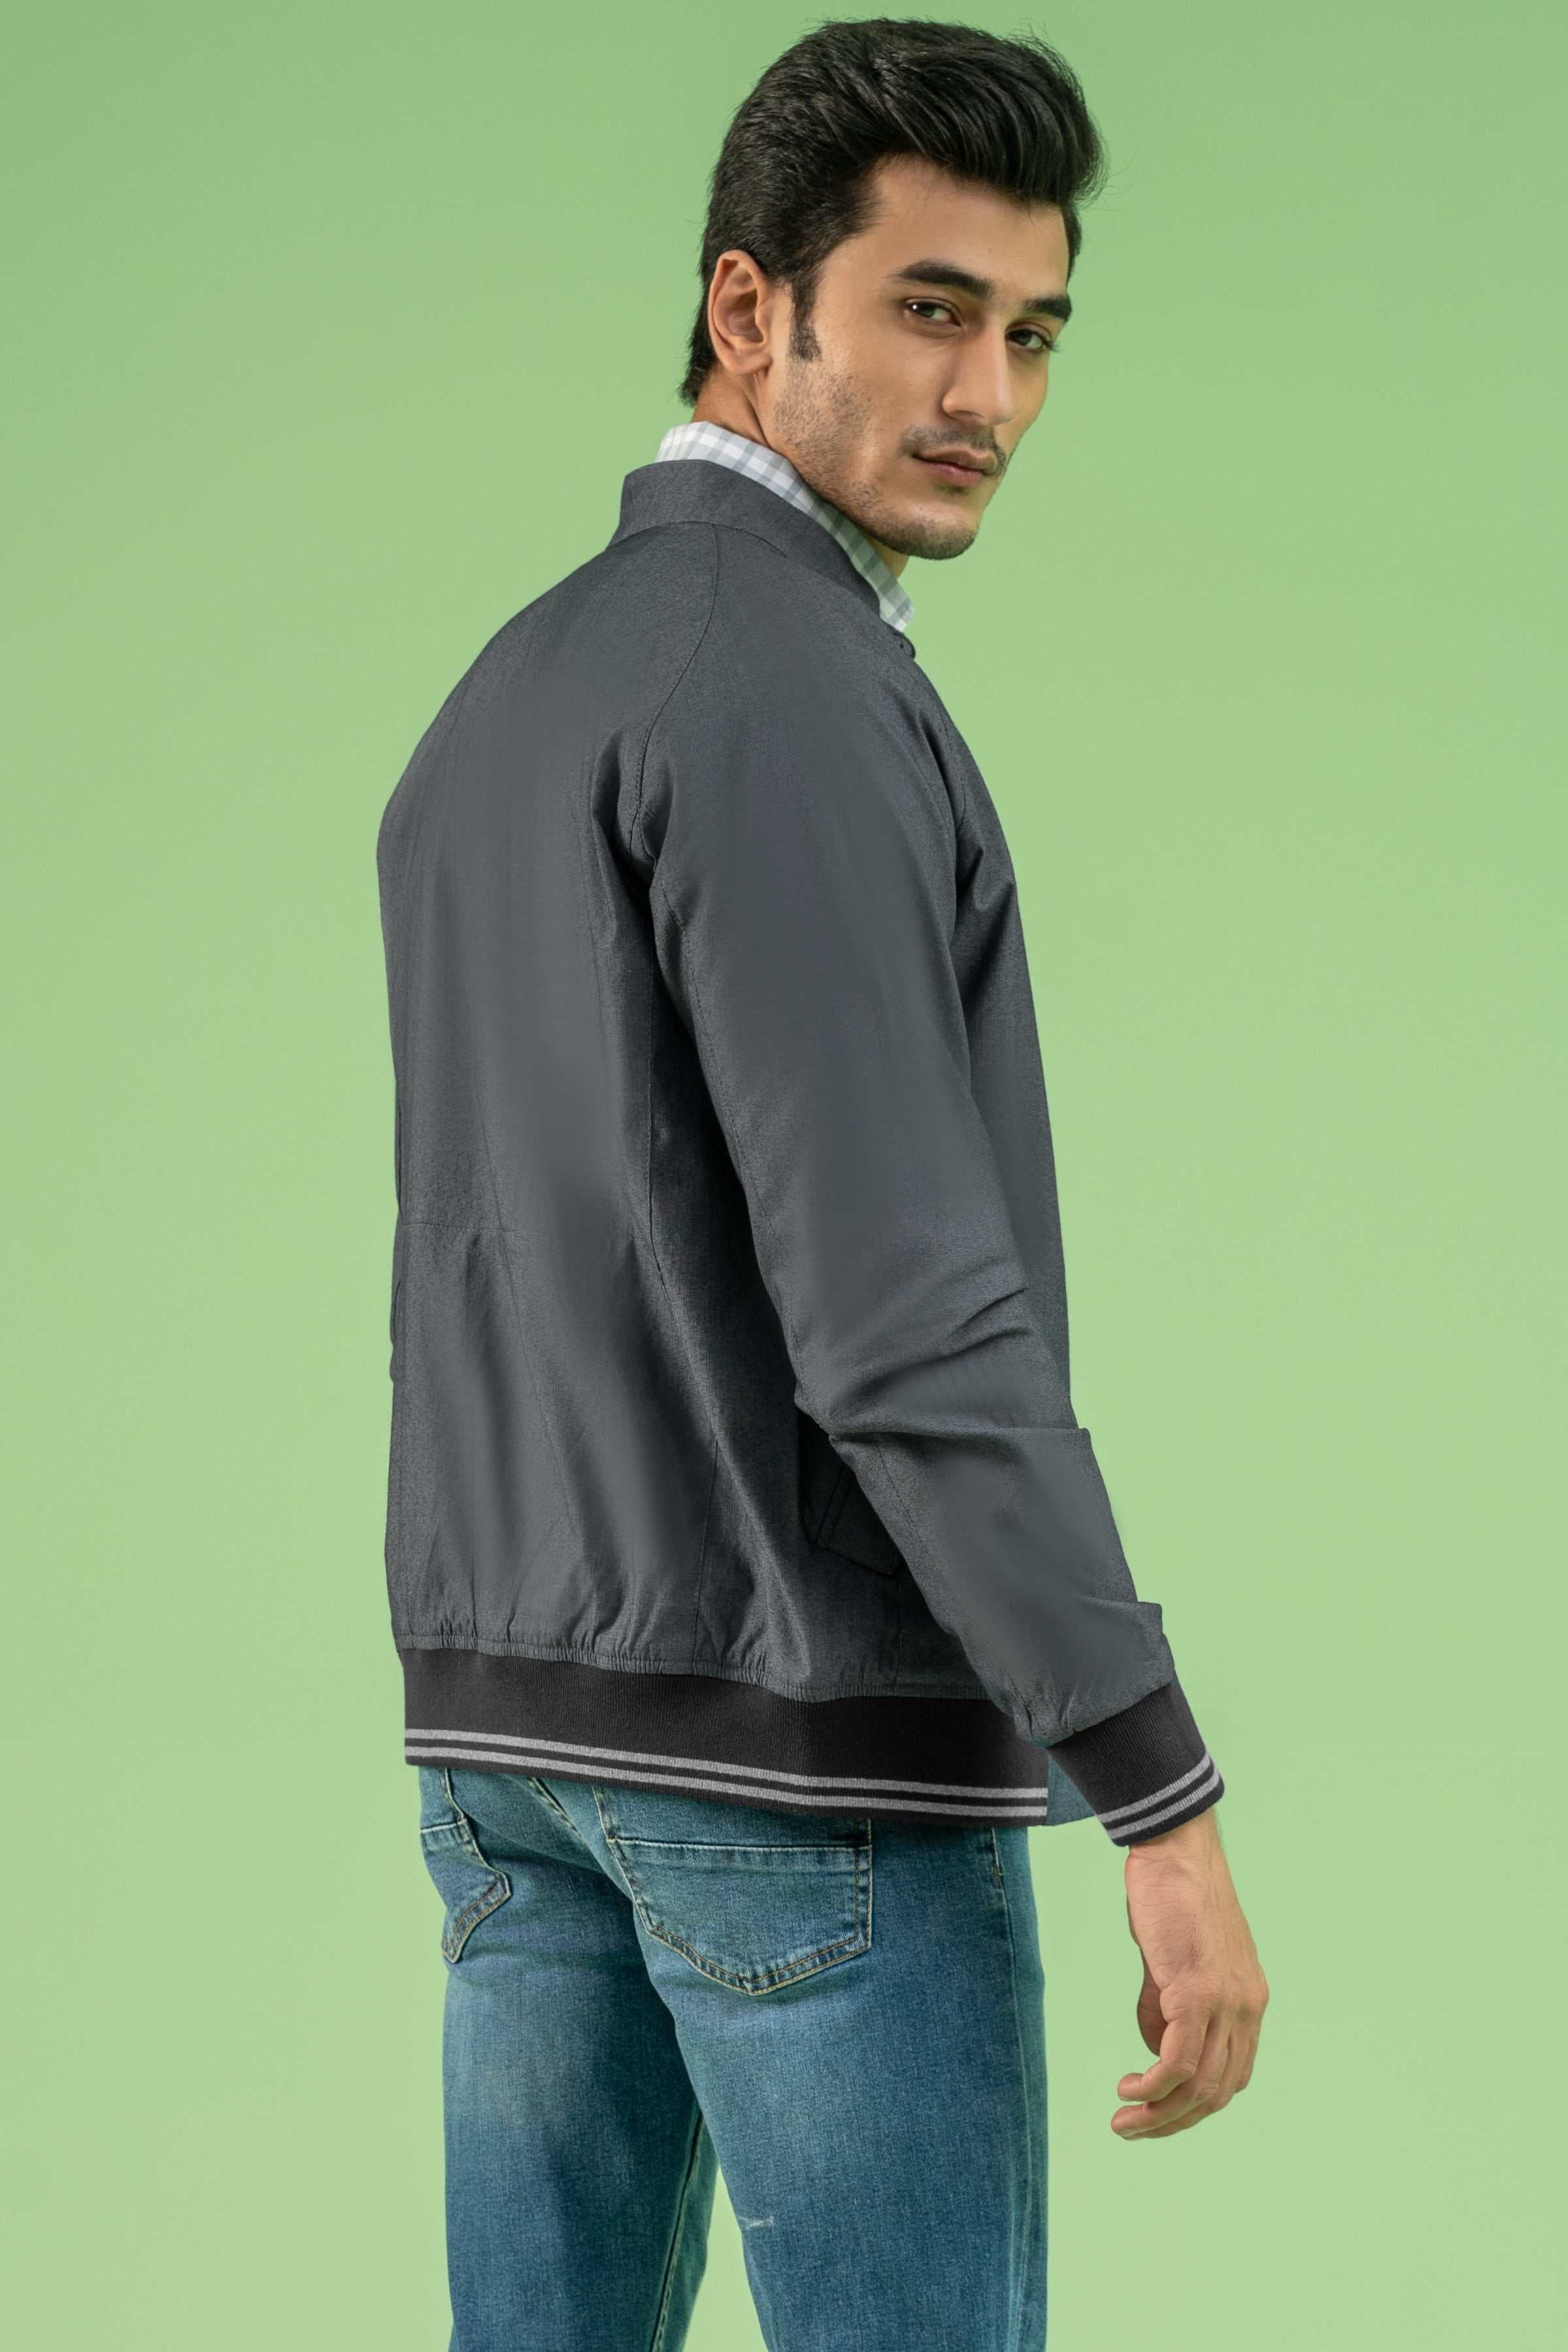 FULL SLEEVE TIPPING TEXTURED JACKET CHARCOAL at Charcoal Clothing